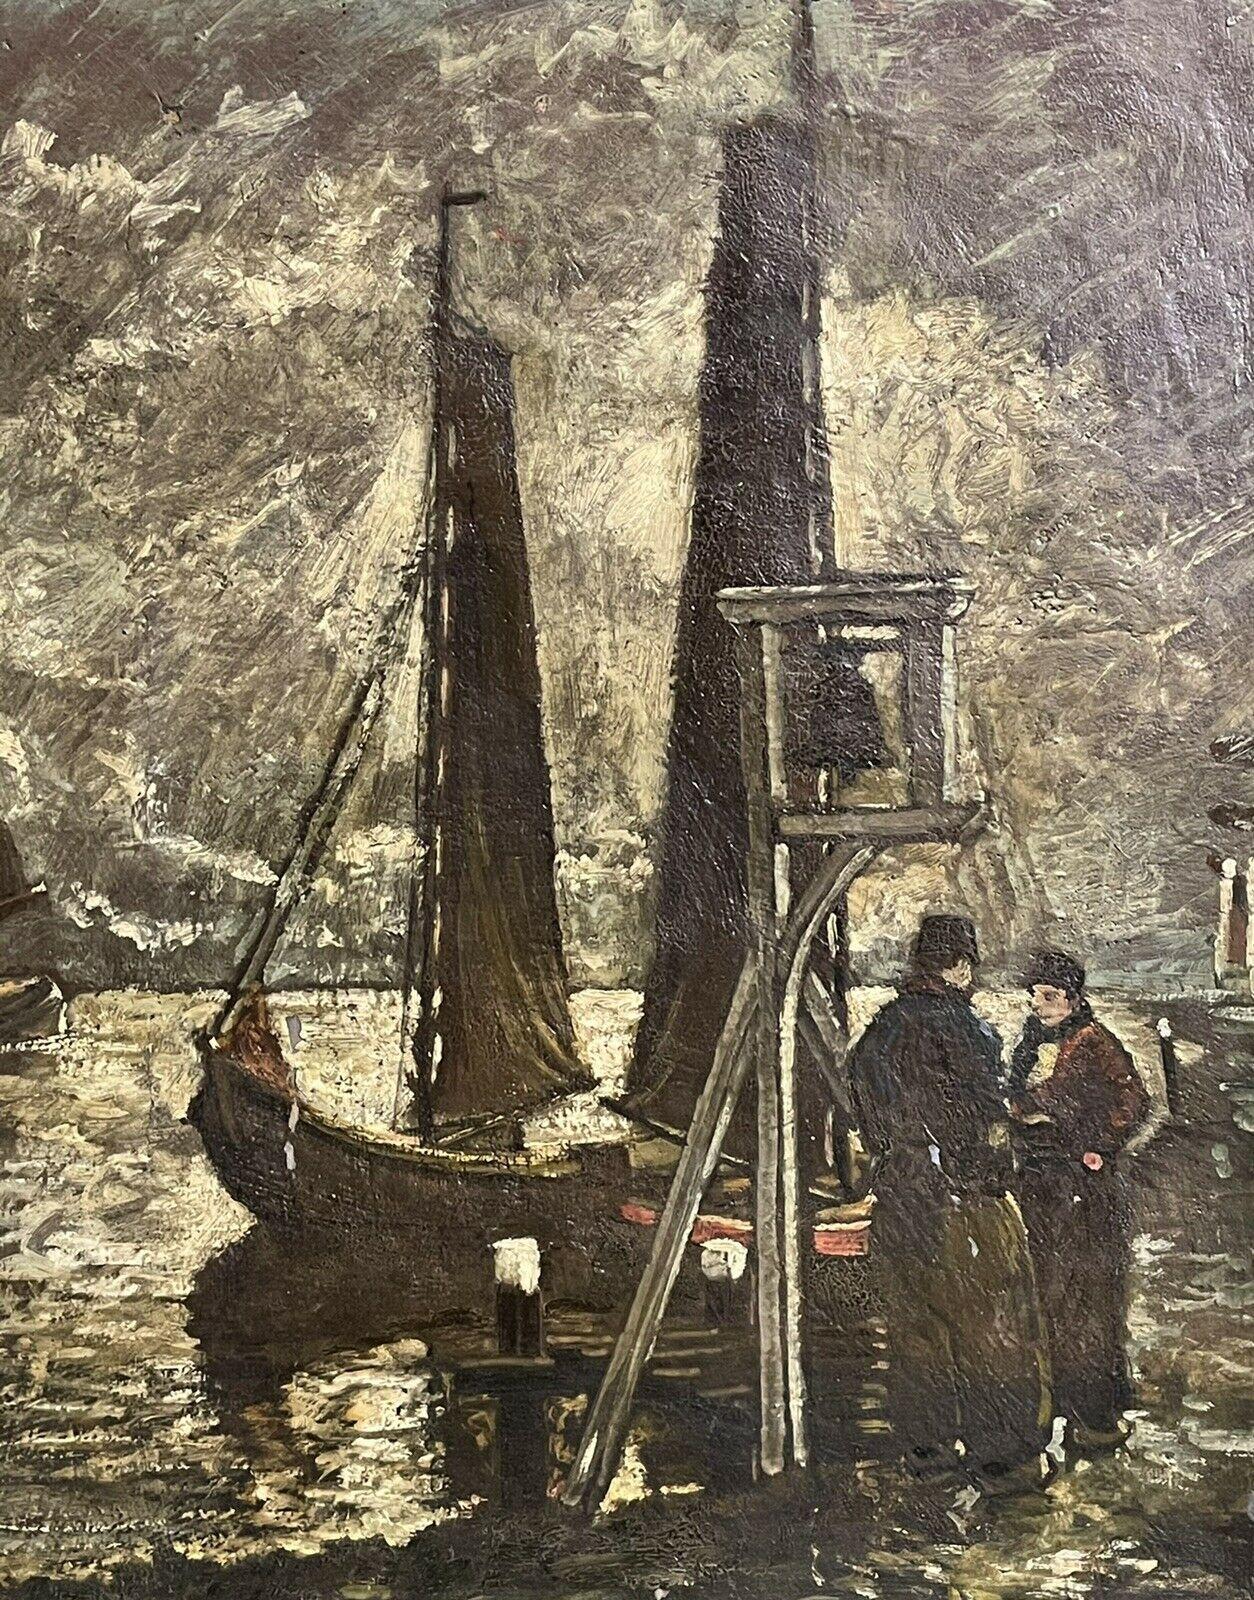 Artist/ School: French School, indistinctly signed front and back, dated. 

Title: By the Harbour. 

Medium: oil painting, on canvas. 

Size:      frame: 27 x 33 inches 
           painting: 20 x 25.5 inches
         
Provenance: private collection,